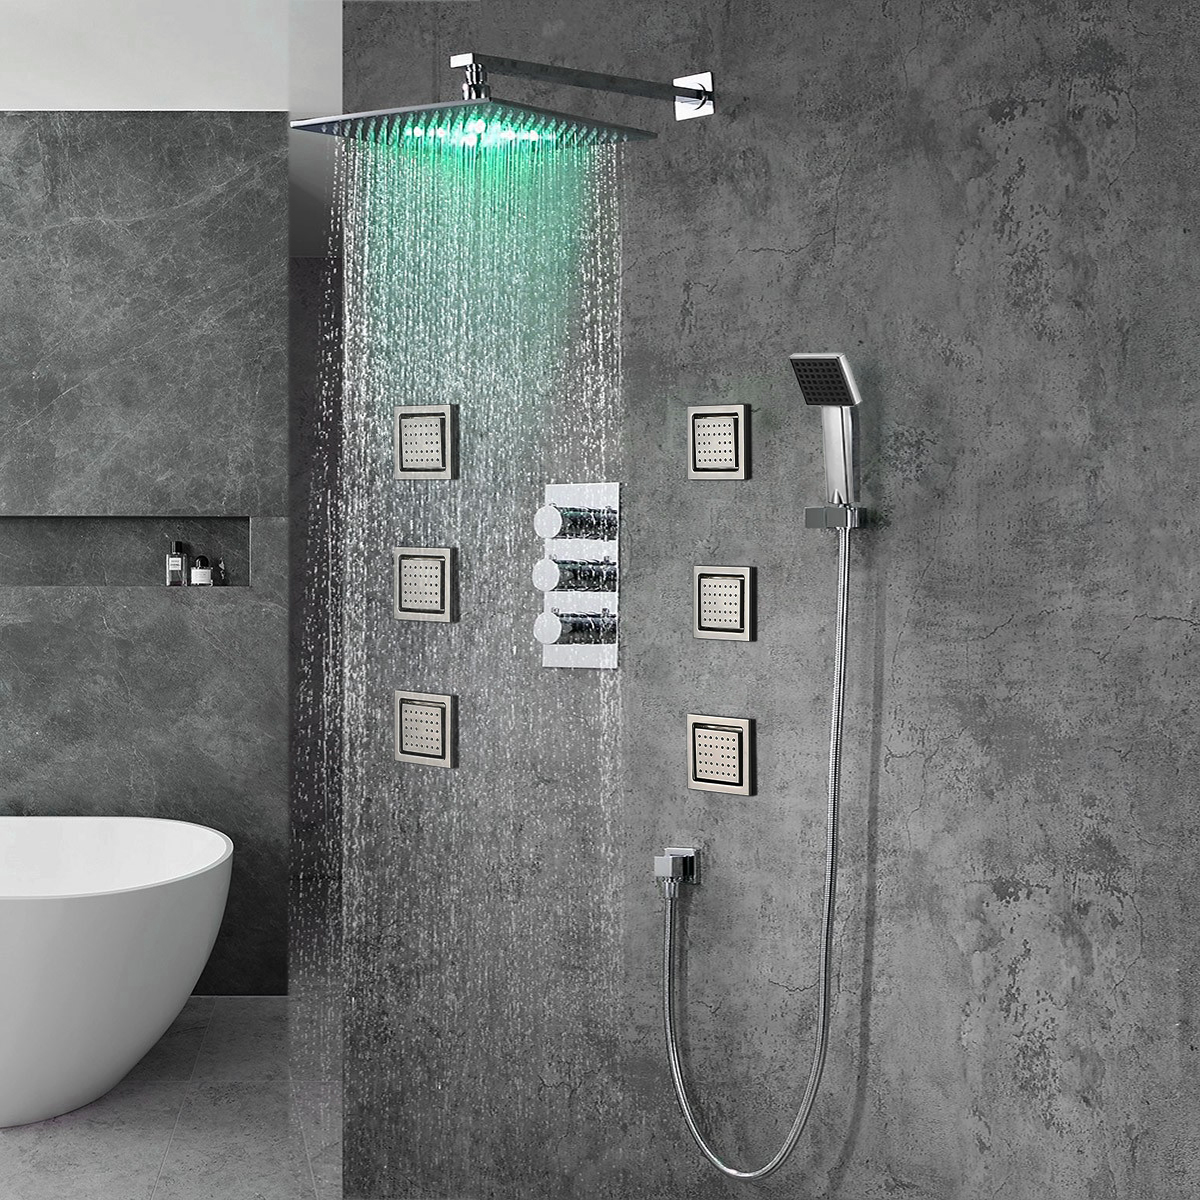 Fontana Milan Stainless Steel Jetted Body Massage LED Shower Head Set With Handheld Shower